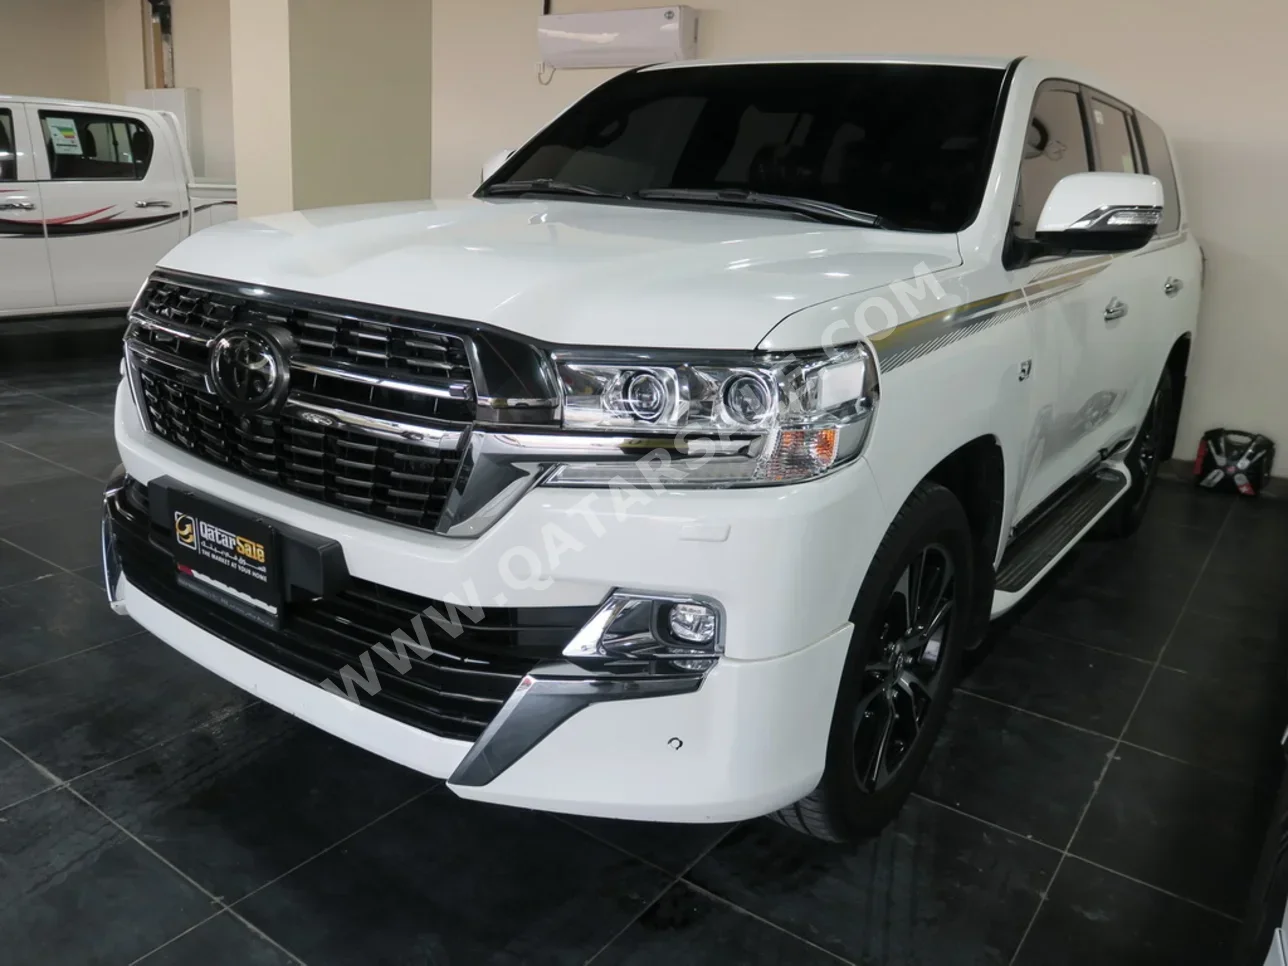 Toyota  Land Cruiser  VXR- Grand Touring S  2021  Automatic  12,000 Km  8 Cylinder  Four Wheel Drive (4WD)  SUV  White